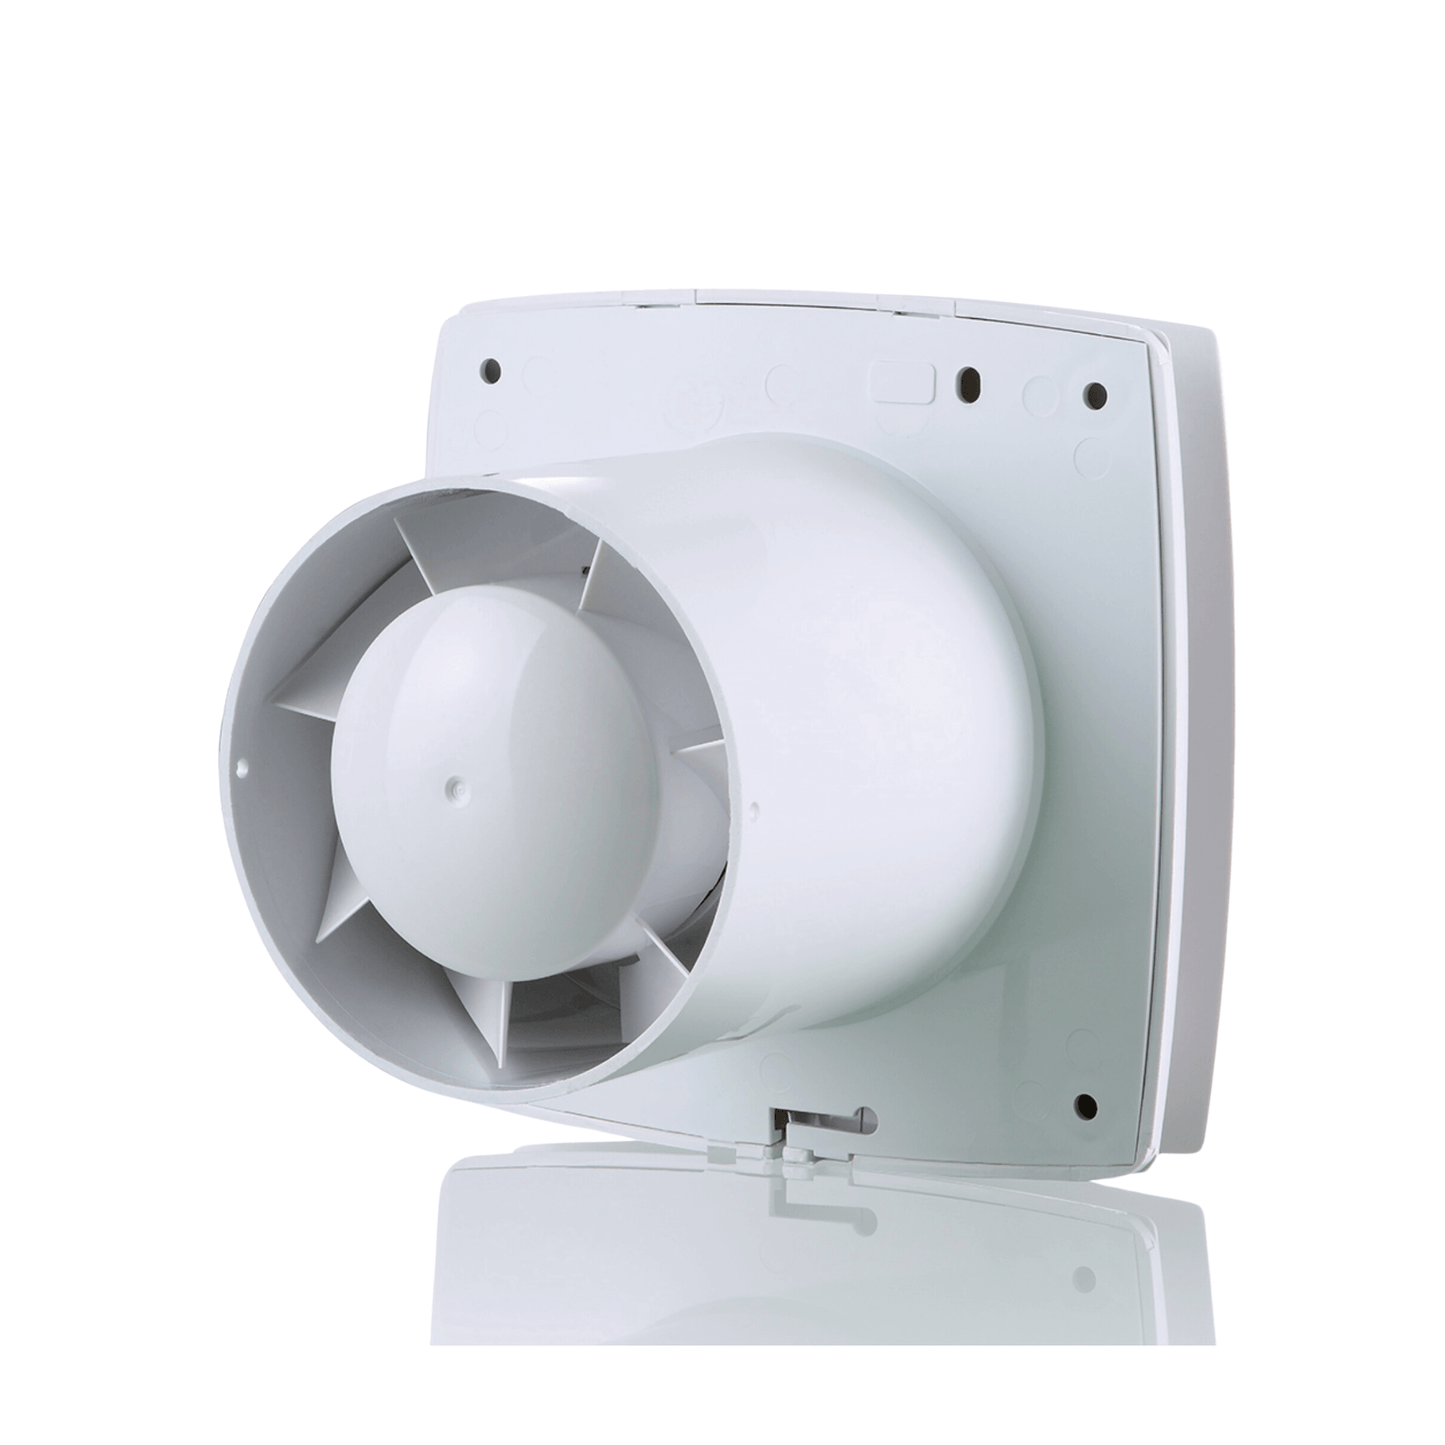 Vents 125 LD Axial Extract Fan